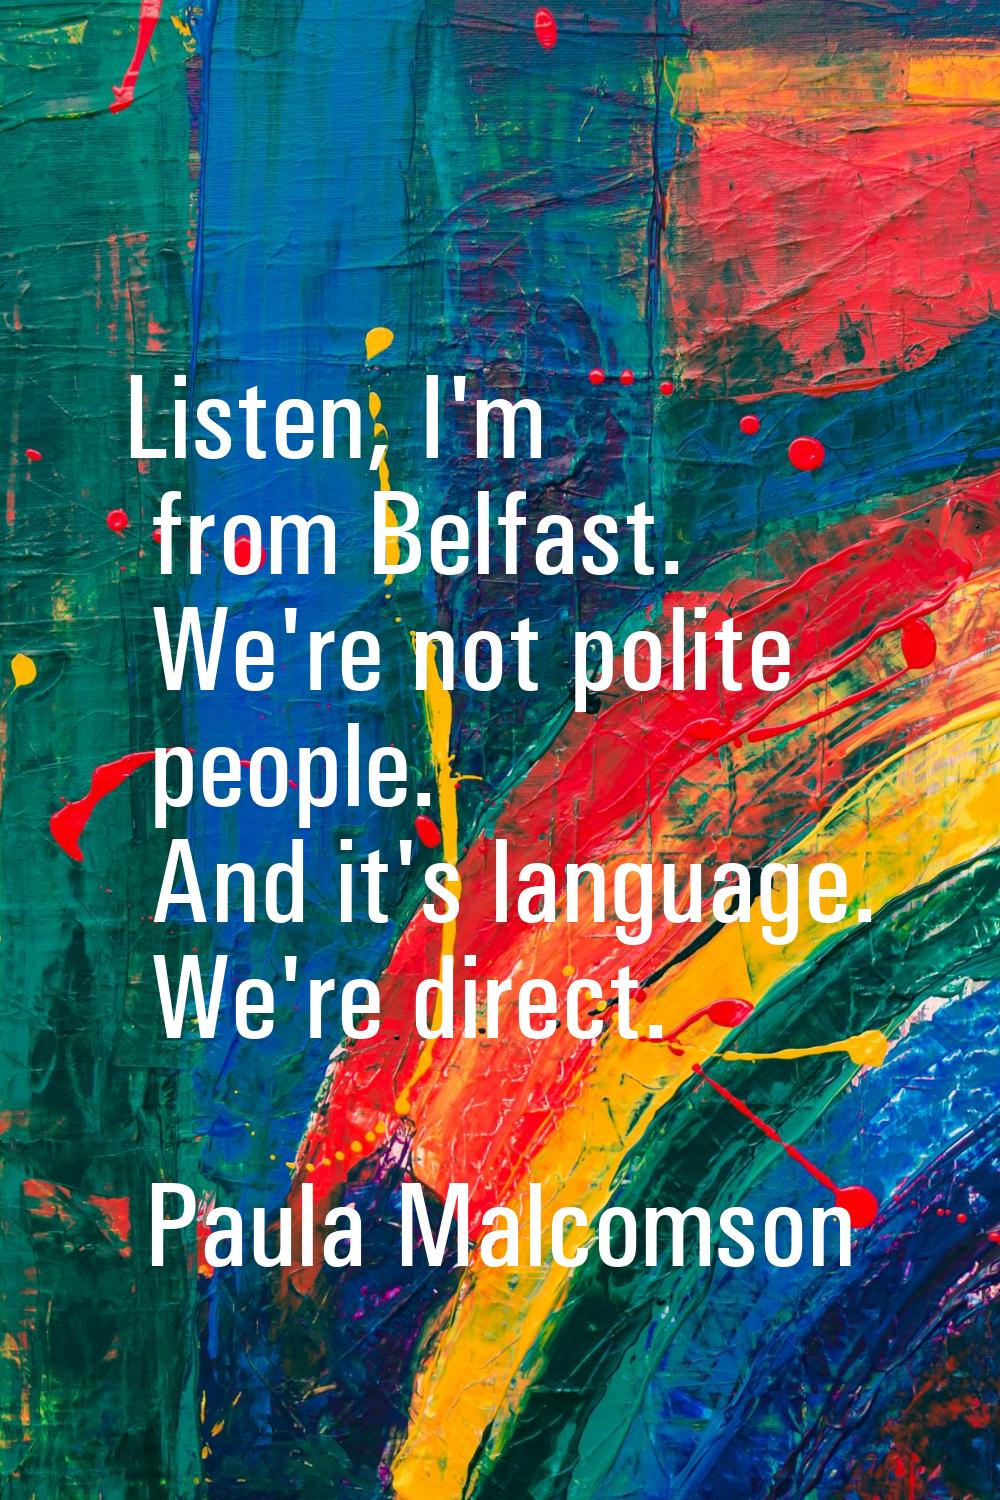 Listen, I'm from Belfast. We're not polite people. And it's language. We're direct.